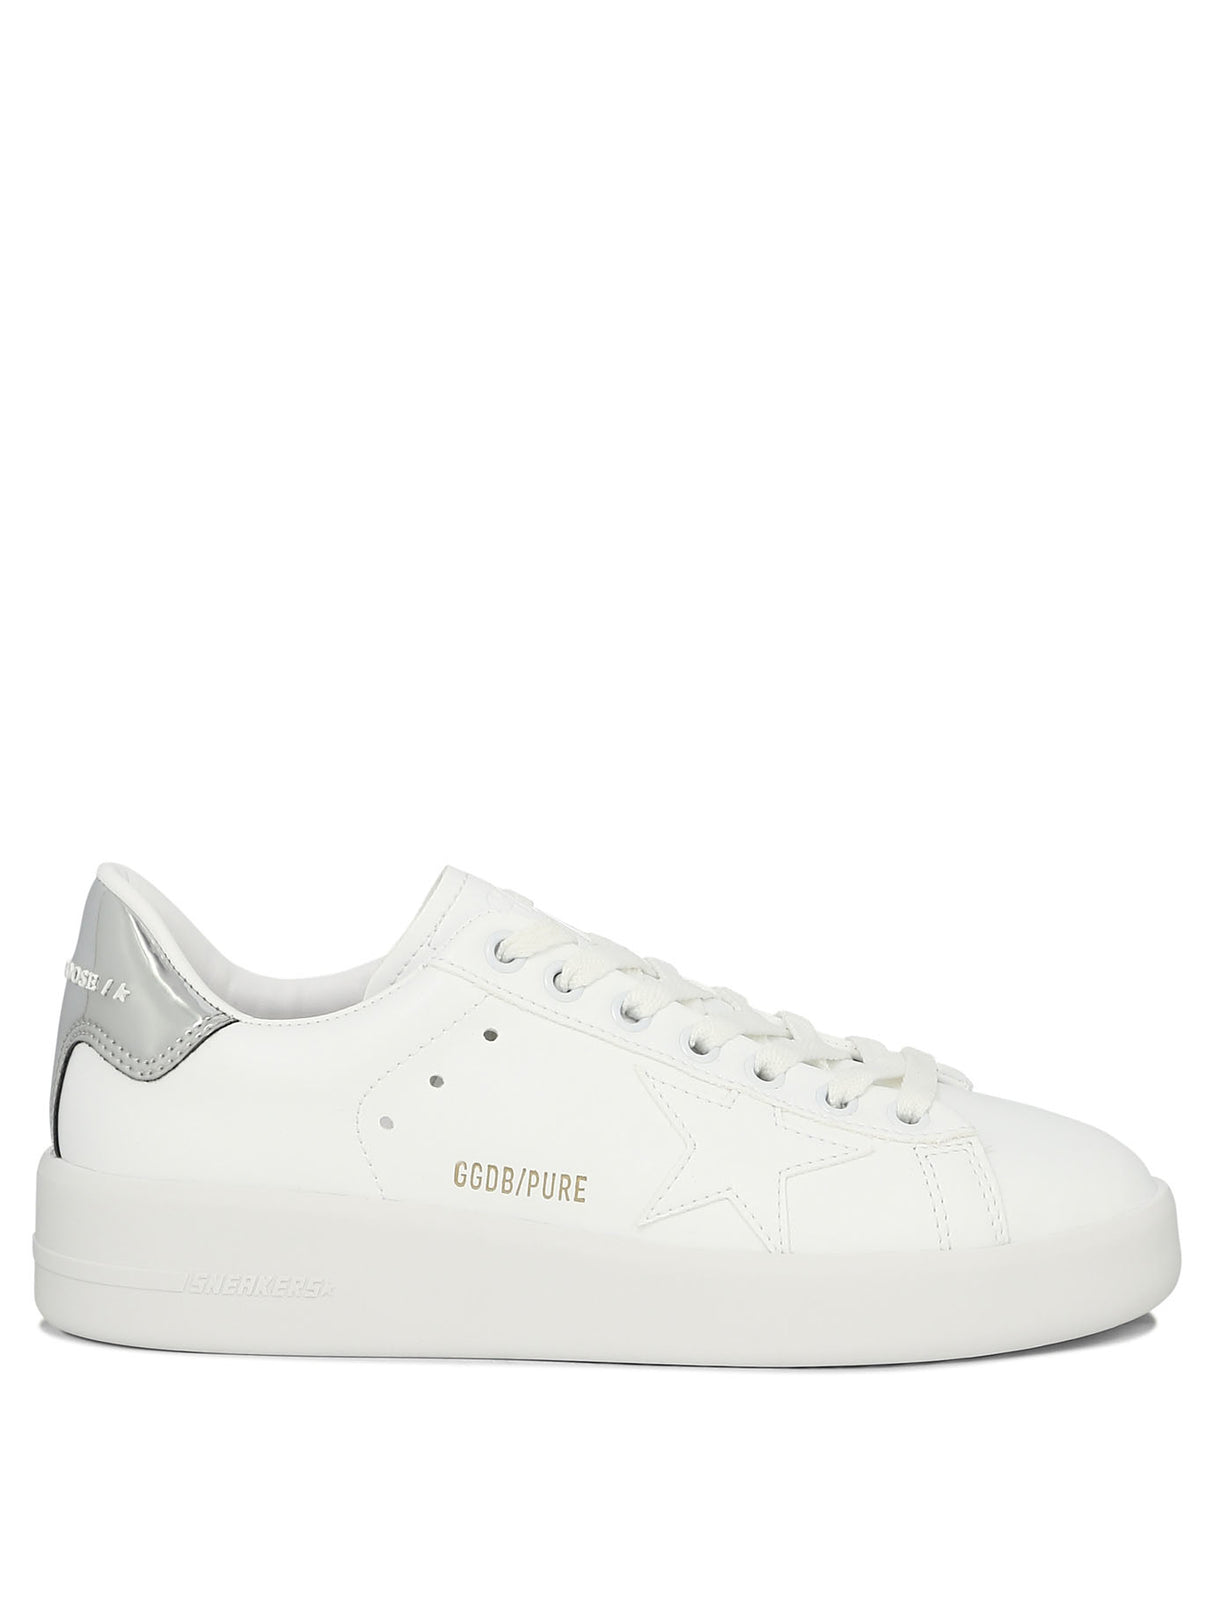 GOLDEN GOOSE White 'Pure New' Sneakers for Women